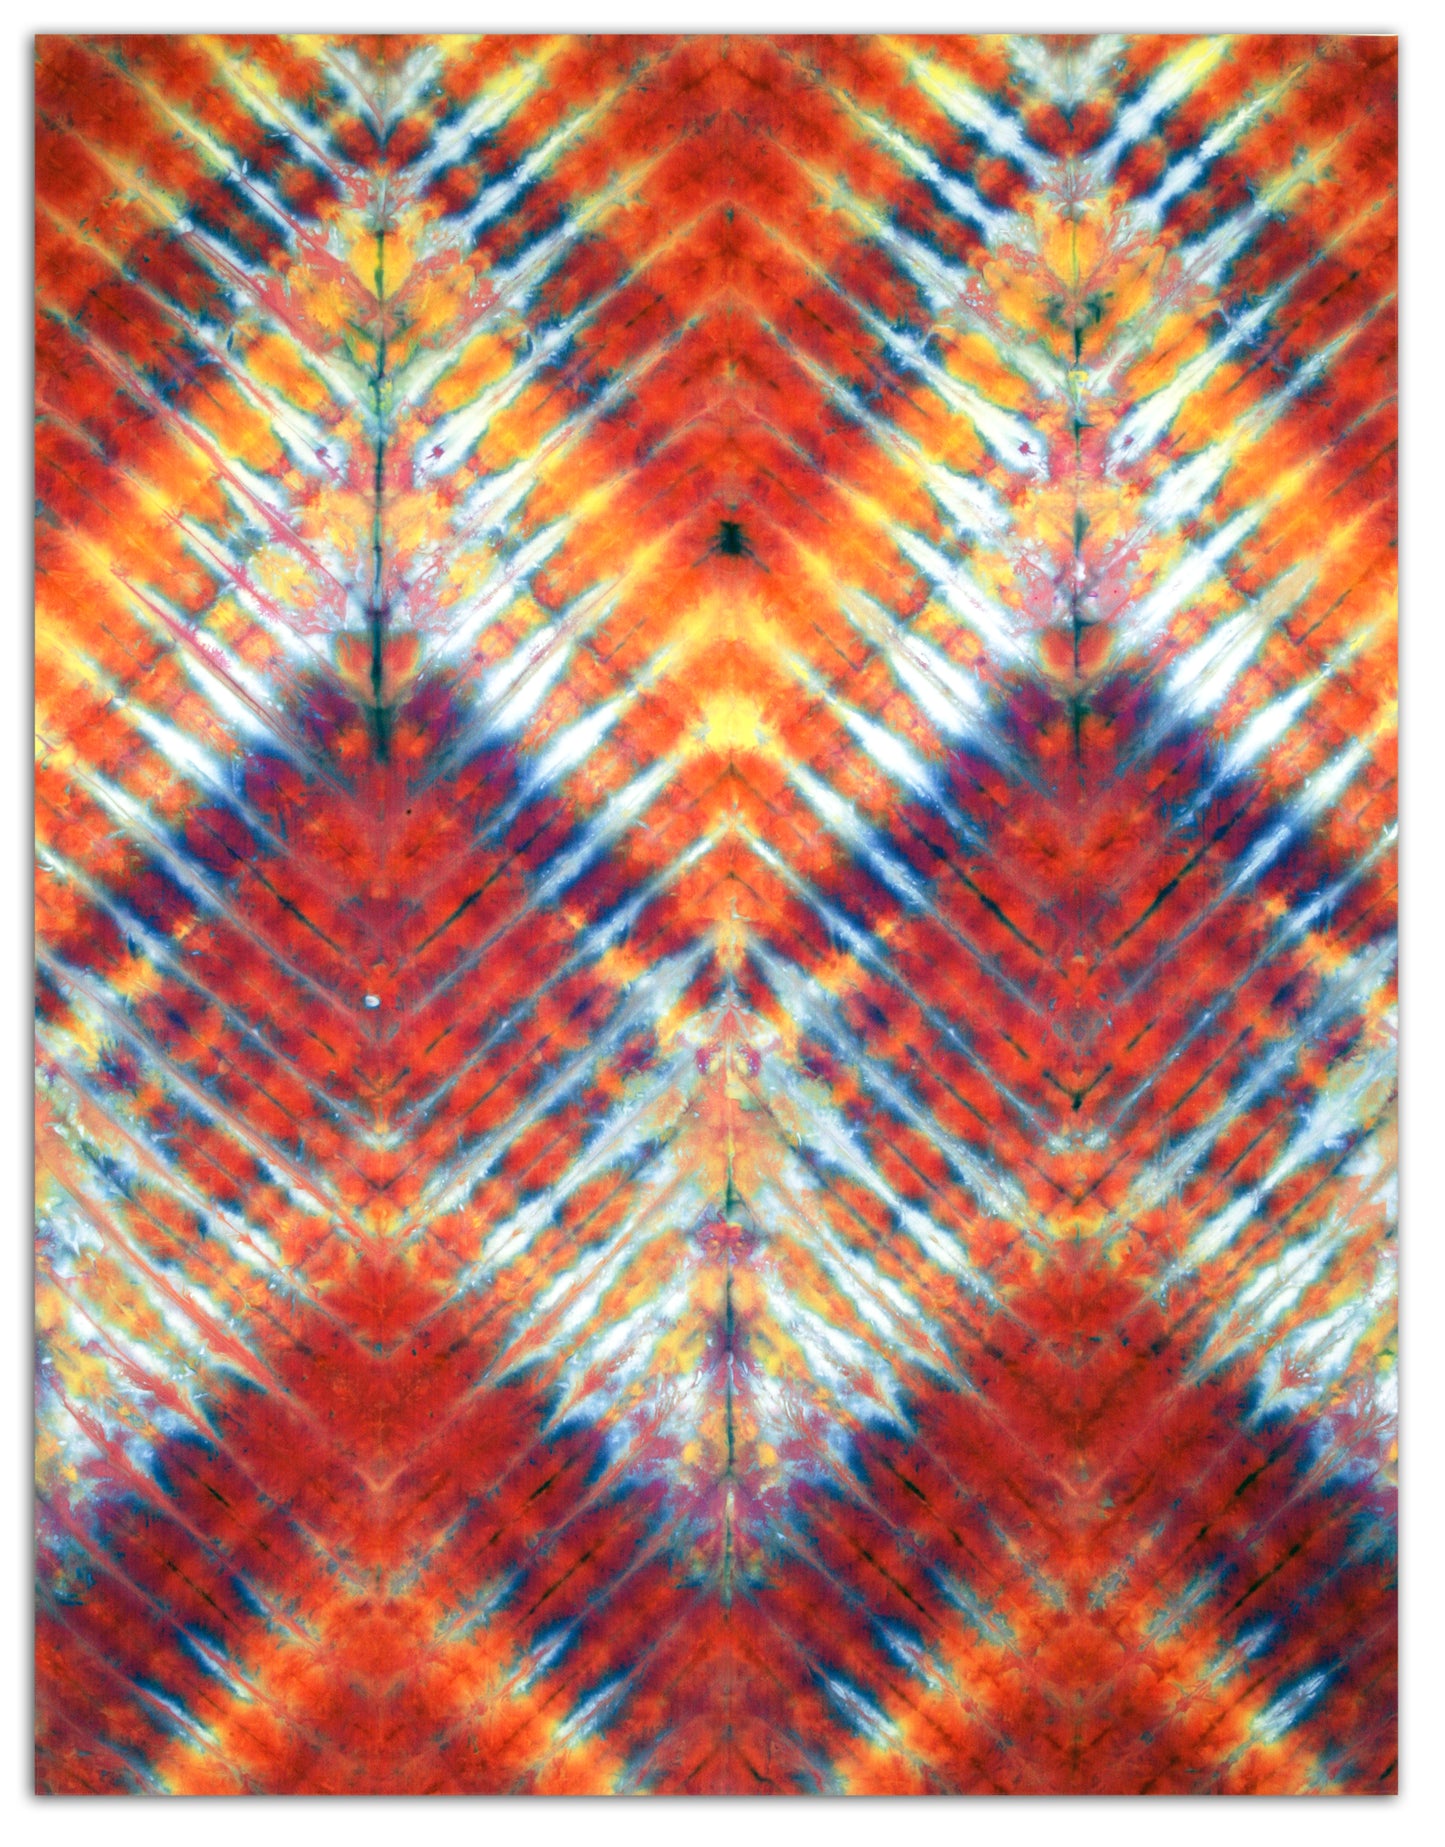 WHOLE CLOTH SHIBORI TITLED: Symmetry CREATED by Karen Hampton SIZE: 43 ½” x 56” There are many happy accidents when dyeing fabric.  Using cold snow with the dye allows different dye particles to strike at different rates to produce many separated colors from just two original dye colors — yellow and purple. Original whole cloth shibori snow-dyed onto heavy white silk habotai.